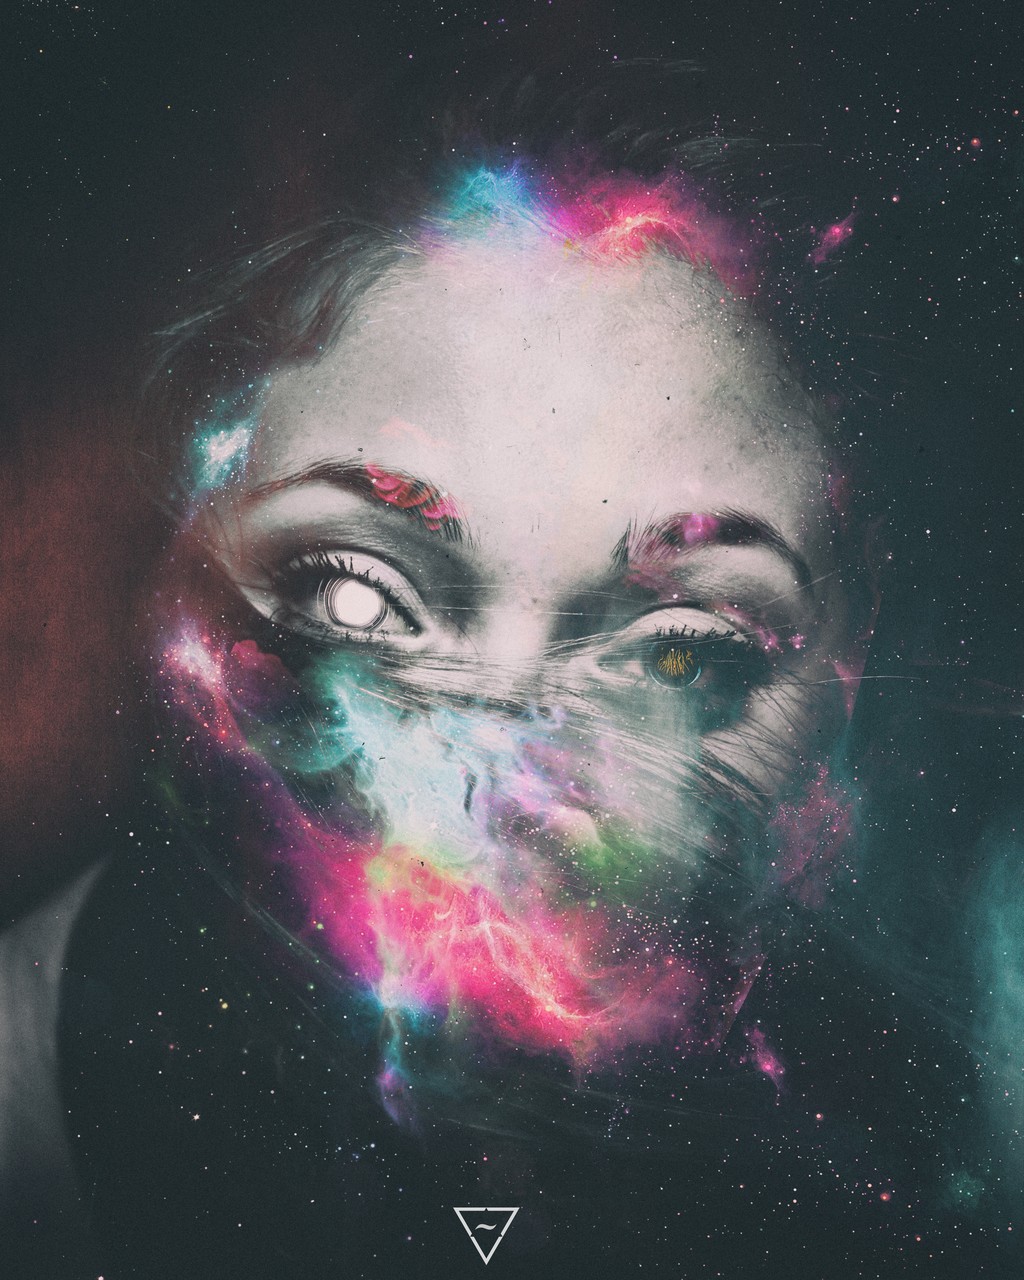 women, Face, Photo manipulation, Photoshop, Abstract, Space Wallpaper